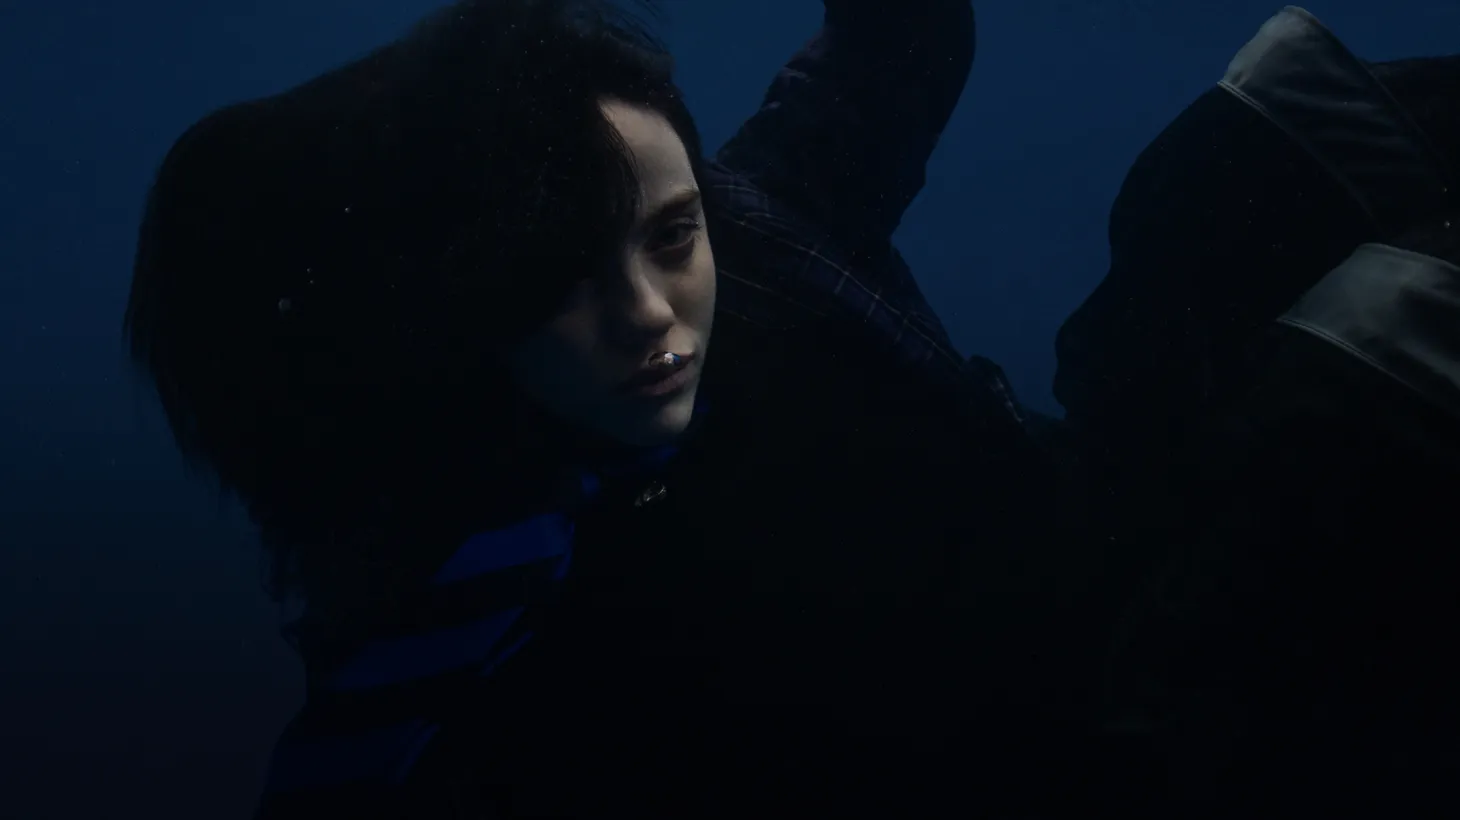 Get ready to re-submerge yourself into Billie’s world.